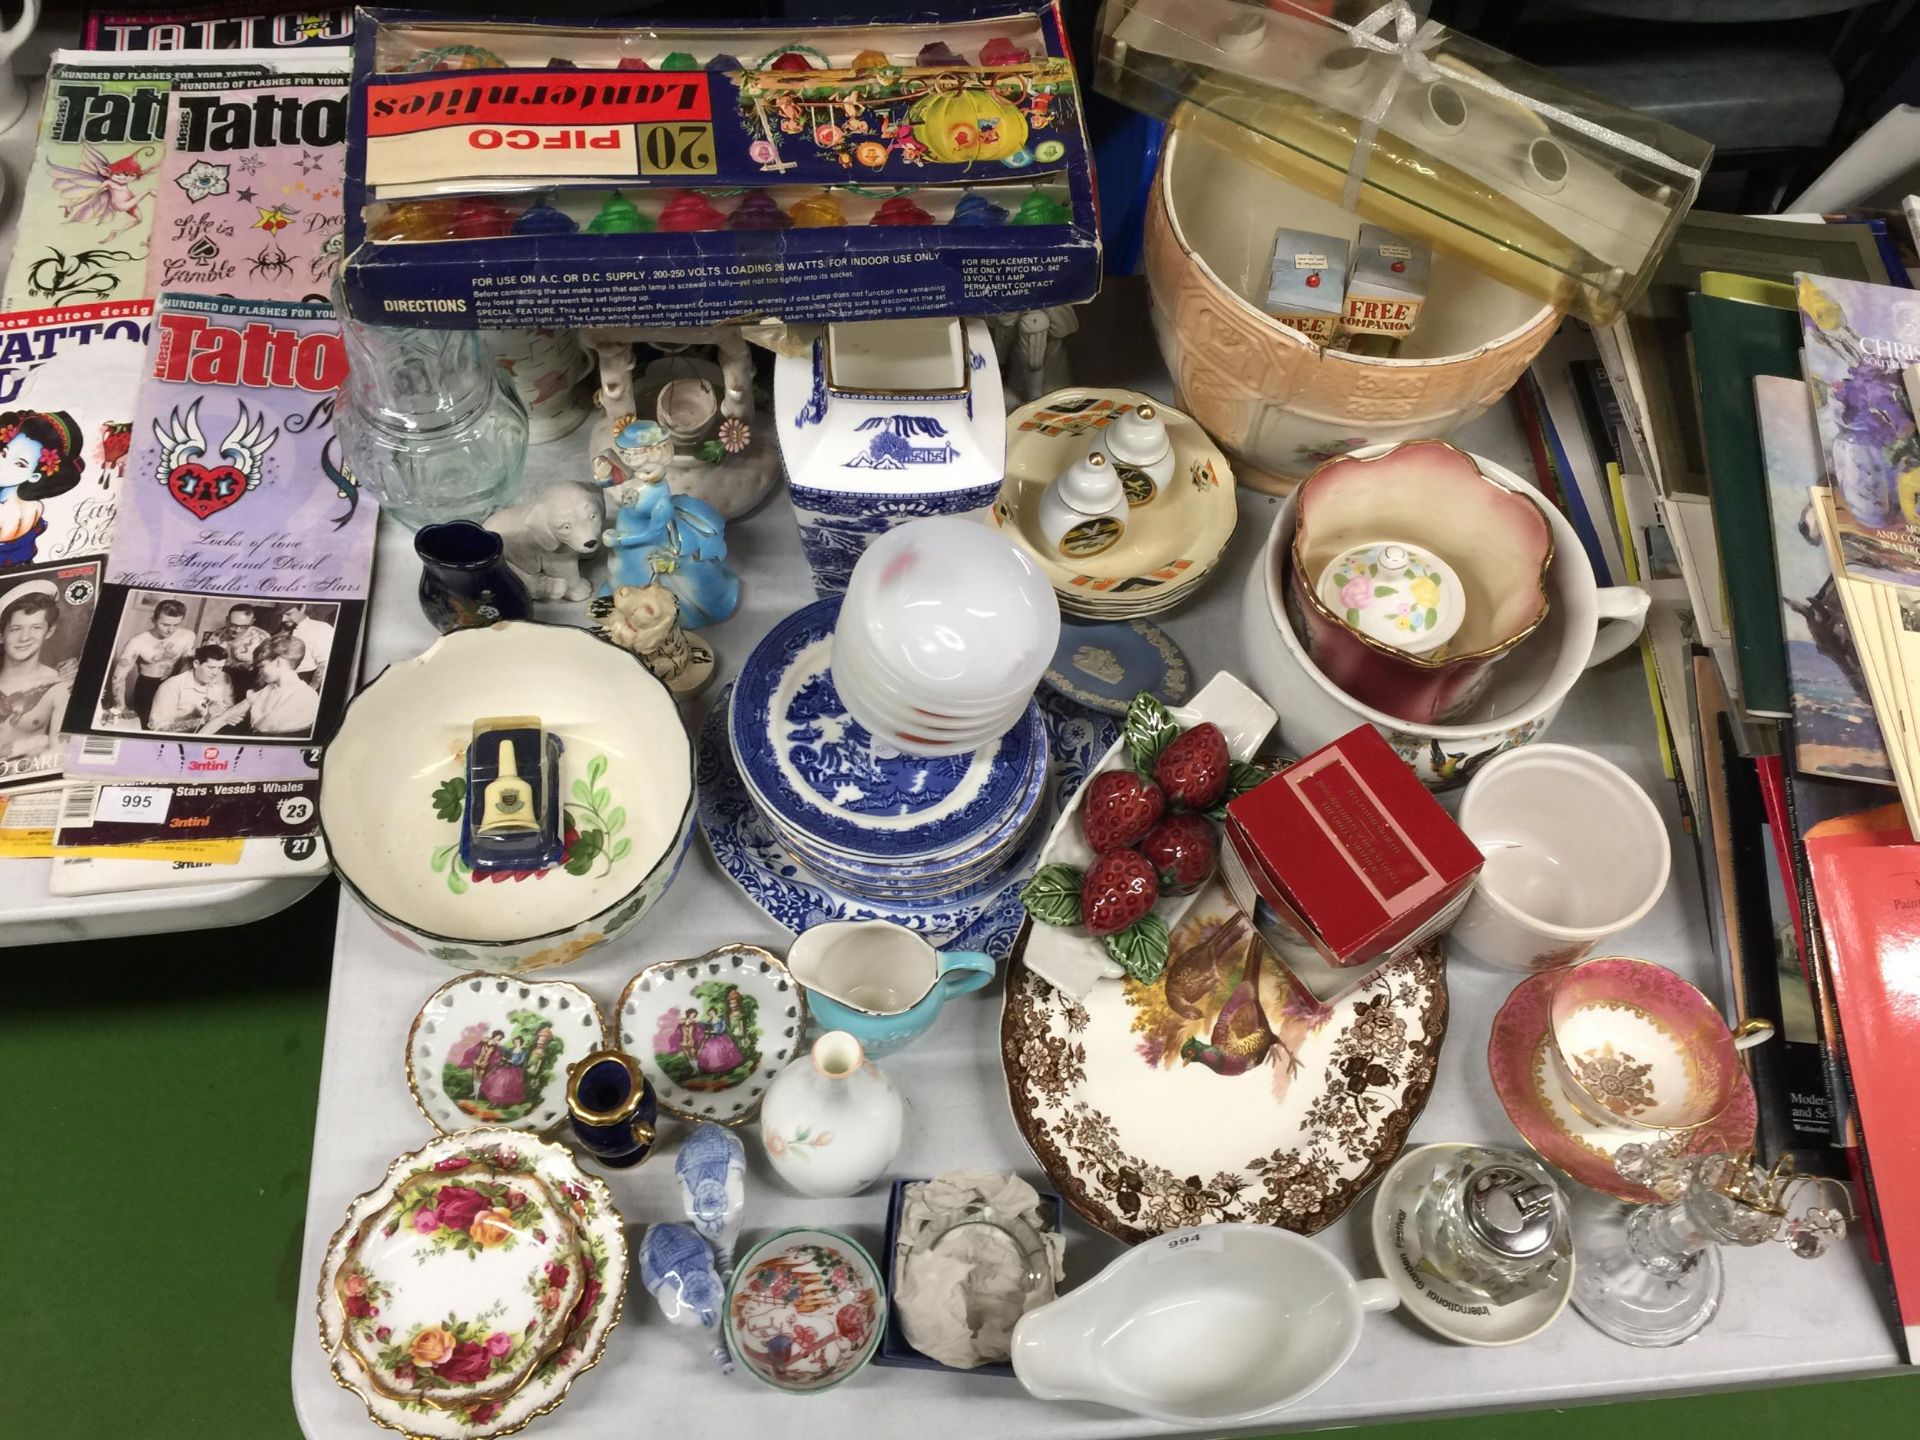 A VERY LARGE MIXED LOT TO INCLUDE PLATES, PLANTERS, VASES, GLASSWARE, VINTAGE CHRISTMAS LIGHTS, - Image 4 of 4